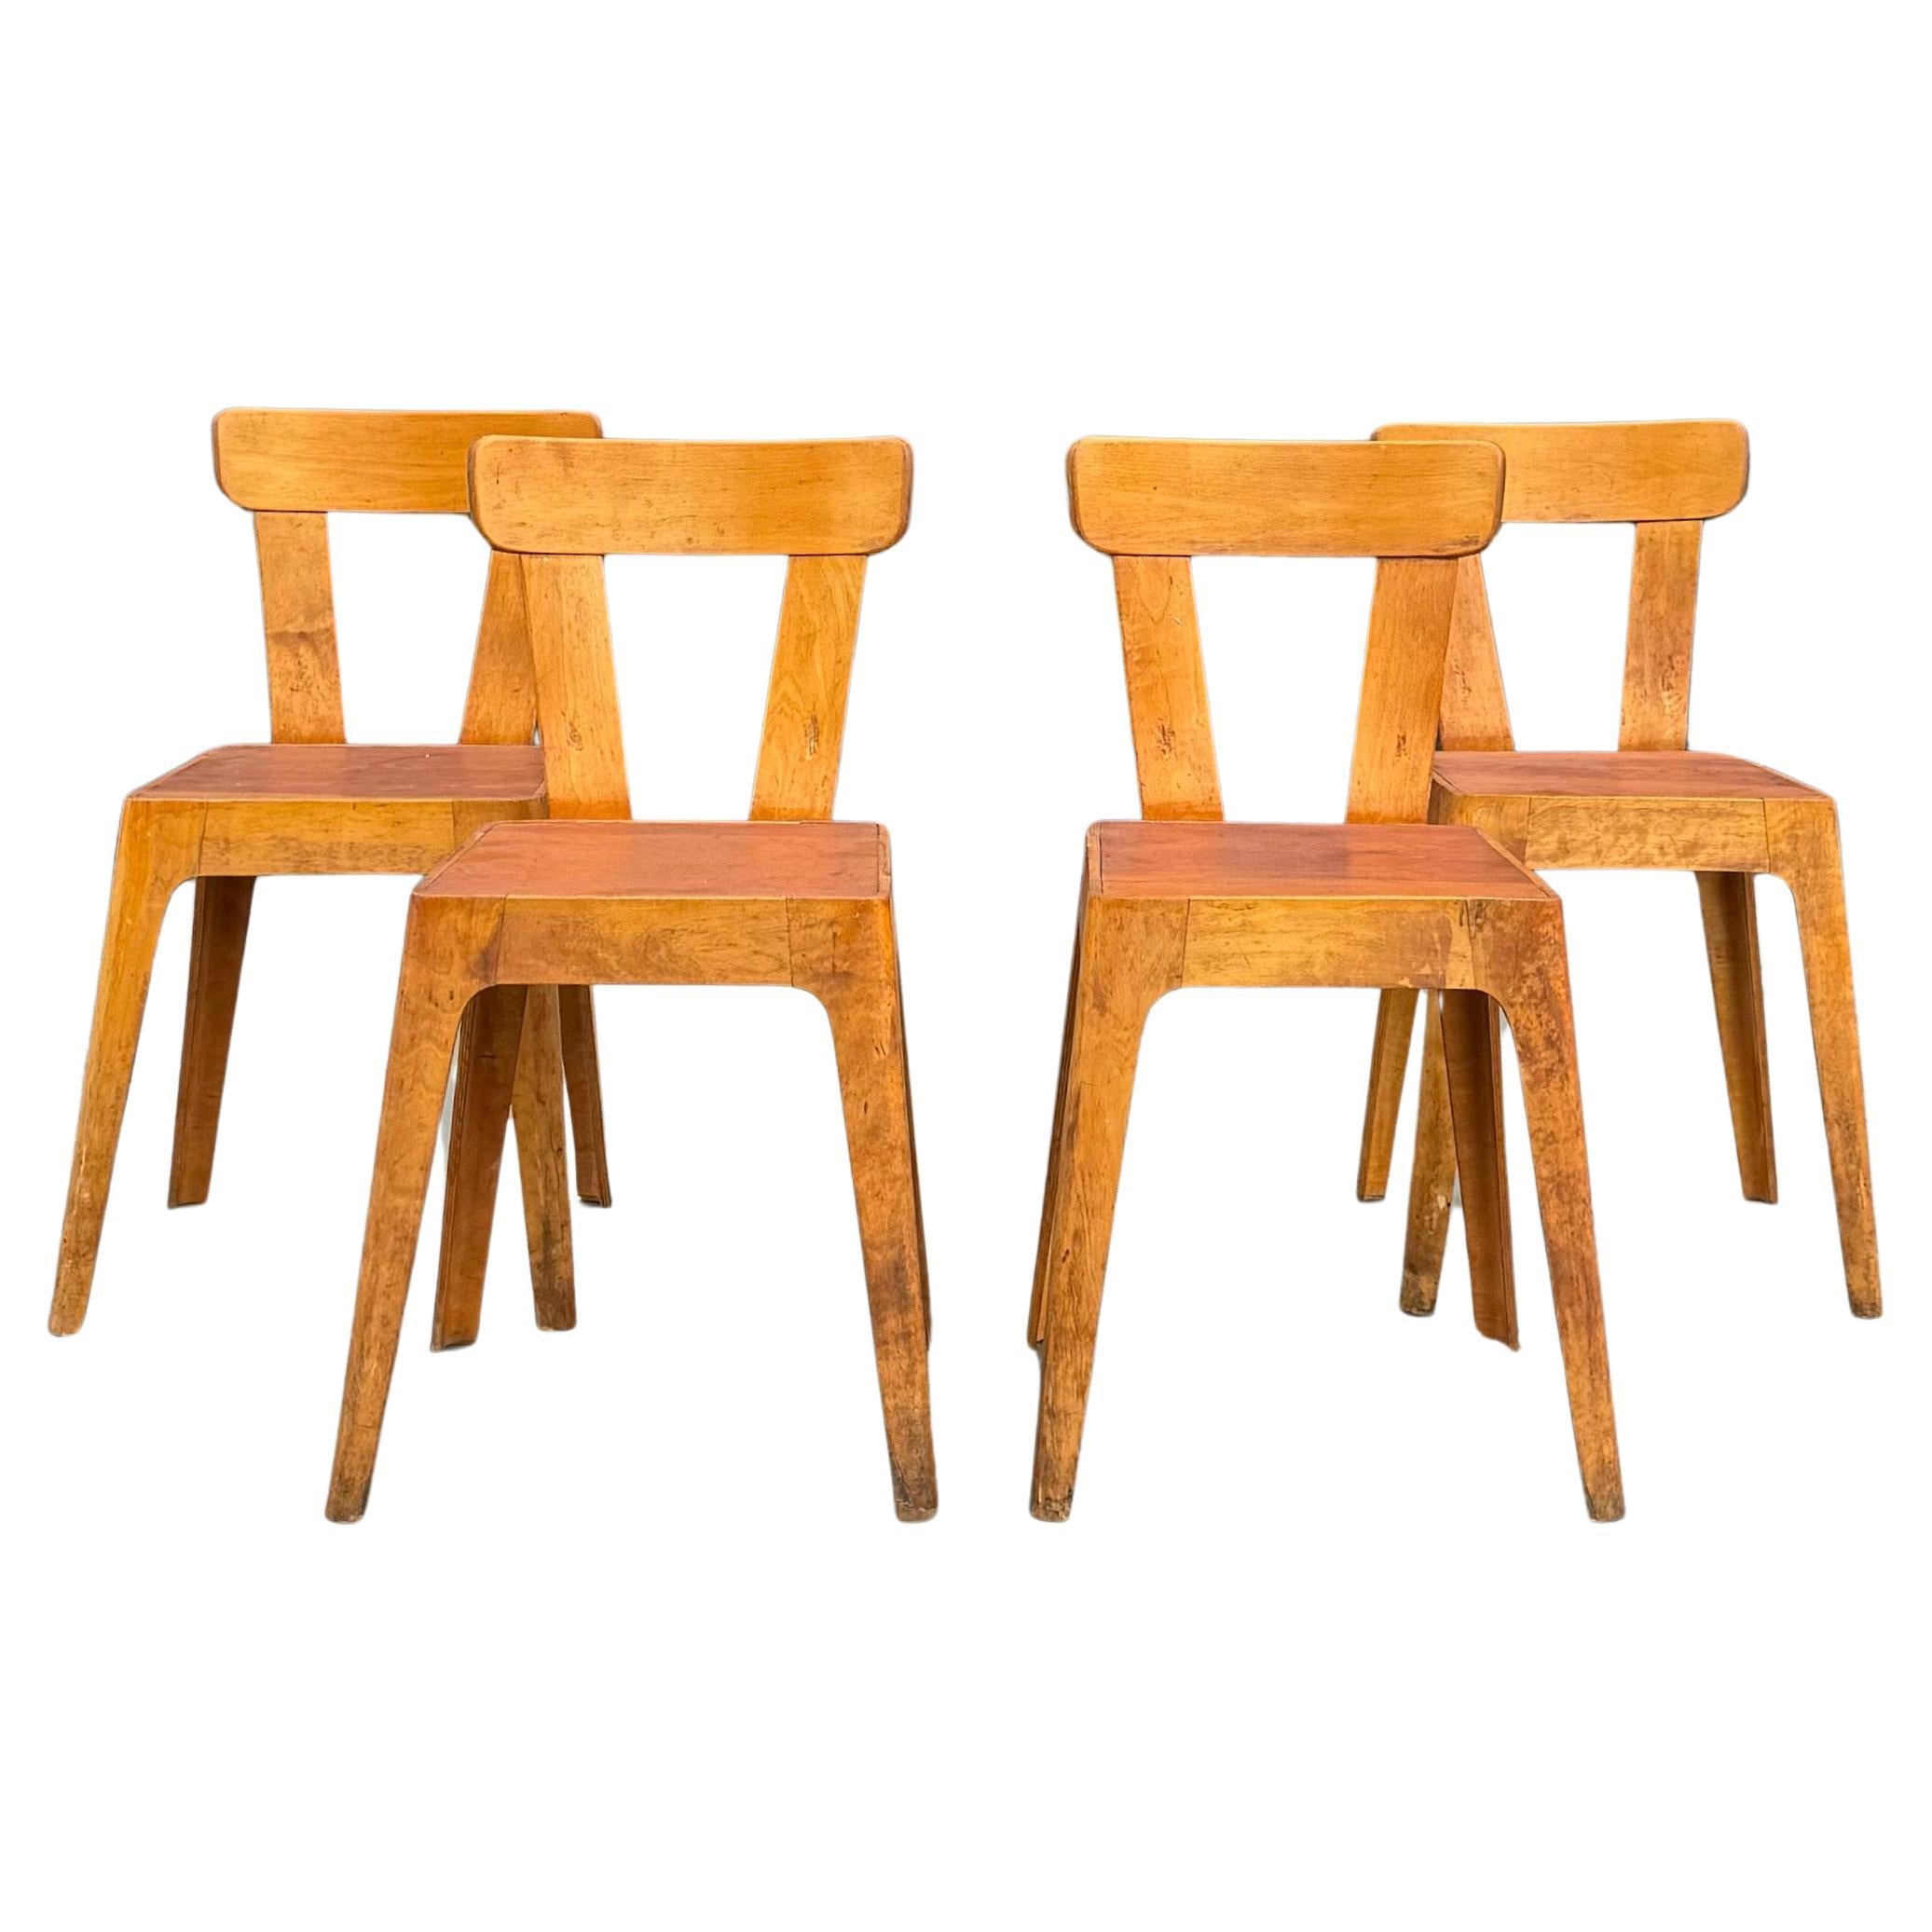 Set of 4 Birch Plywood Chairs, Sweden, Early-1950s For Sale